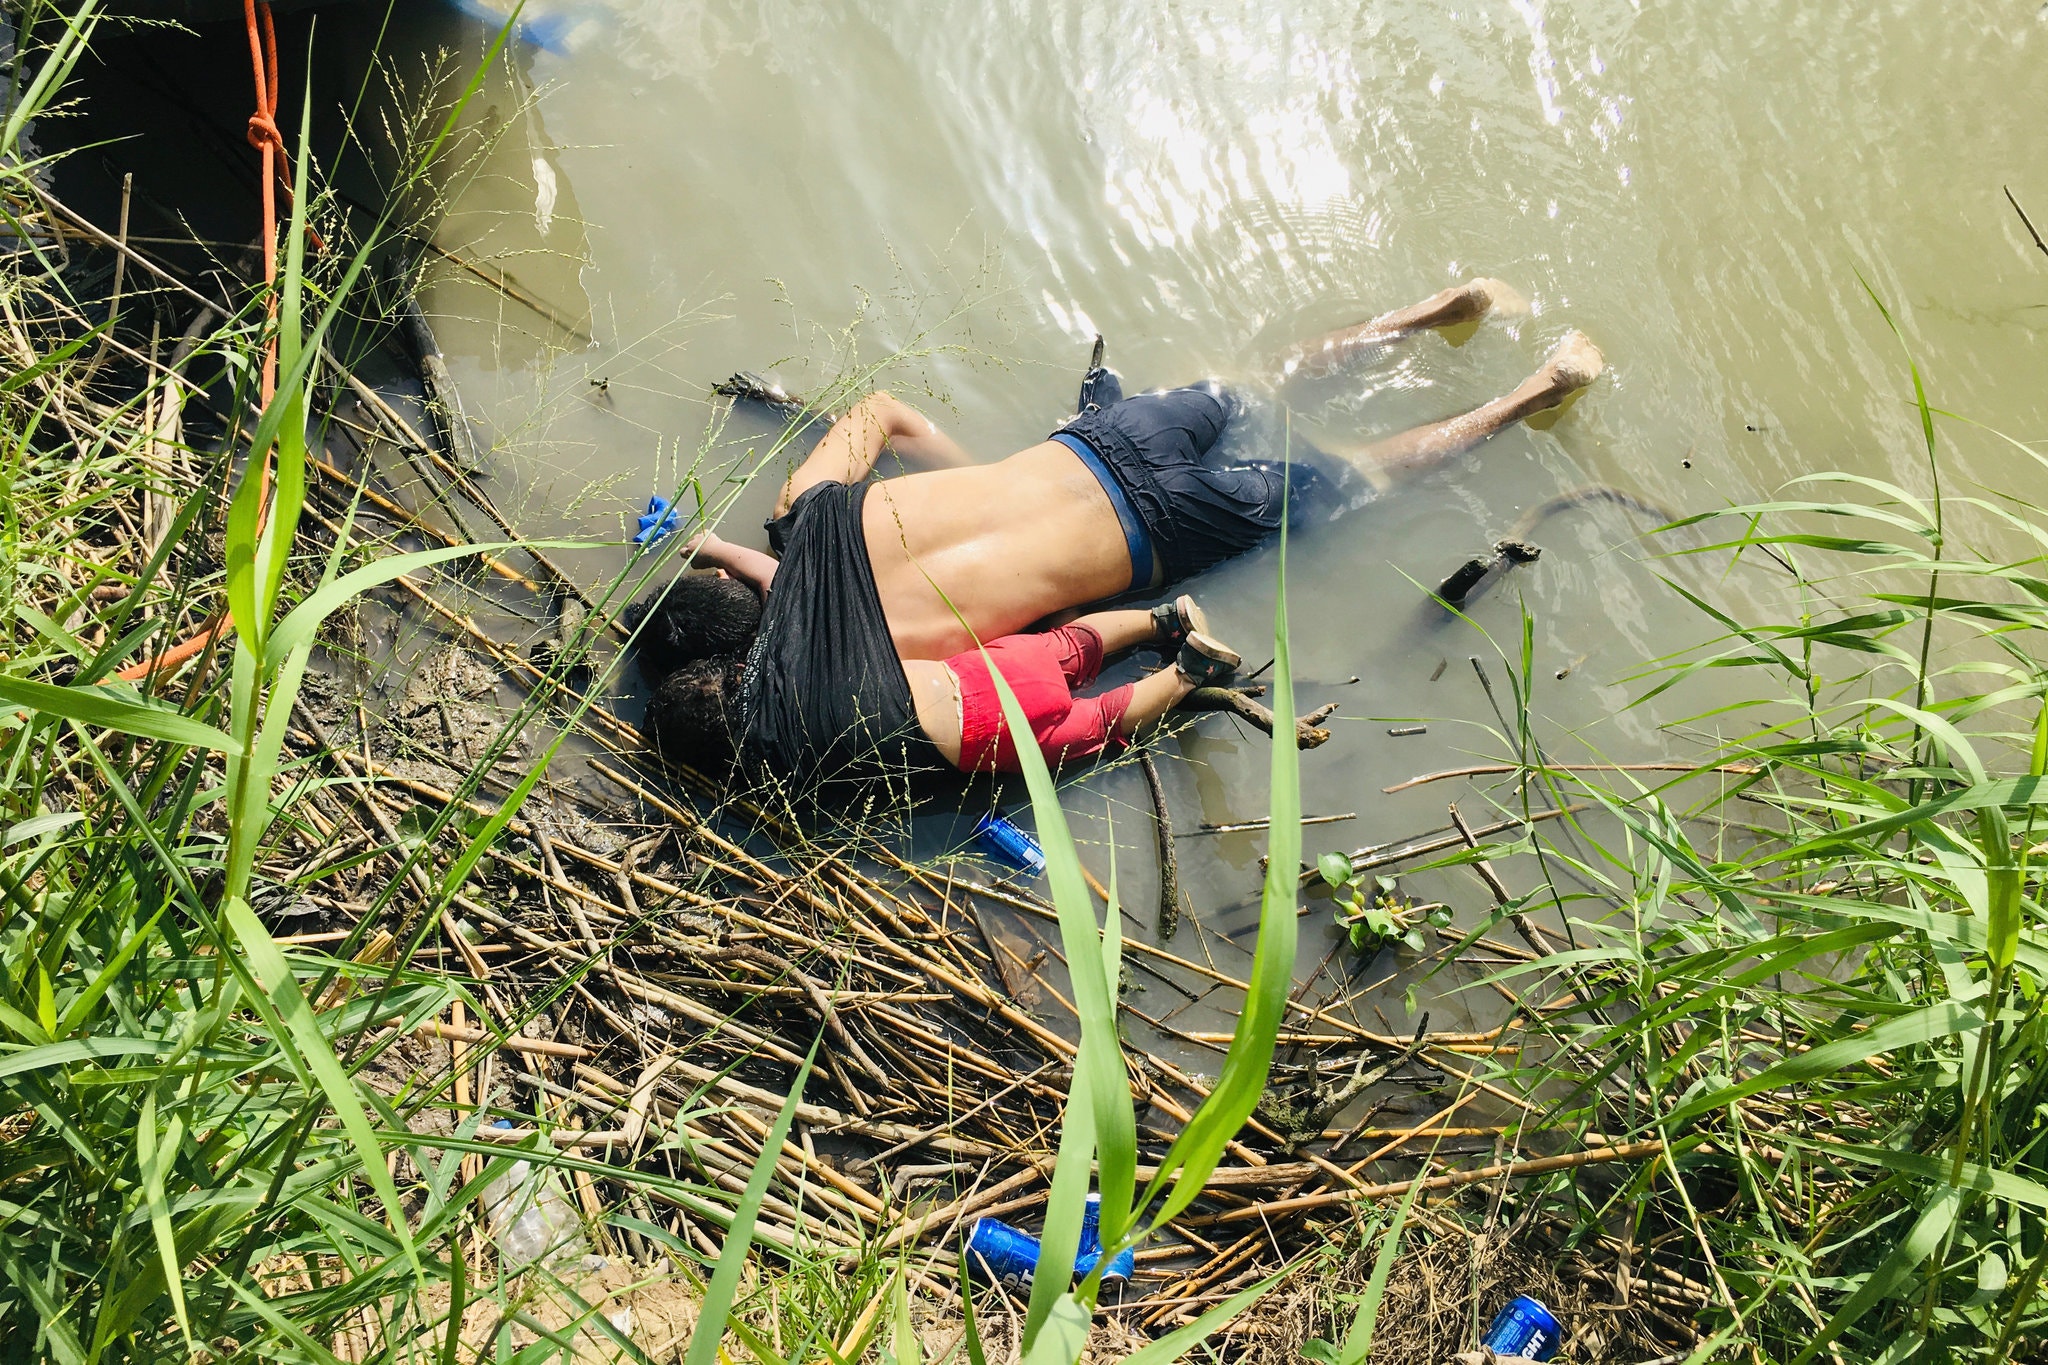 Photo of Drowned Migrants Captures Pathos of Those Who Risk It All ...